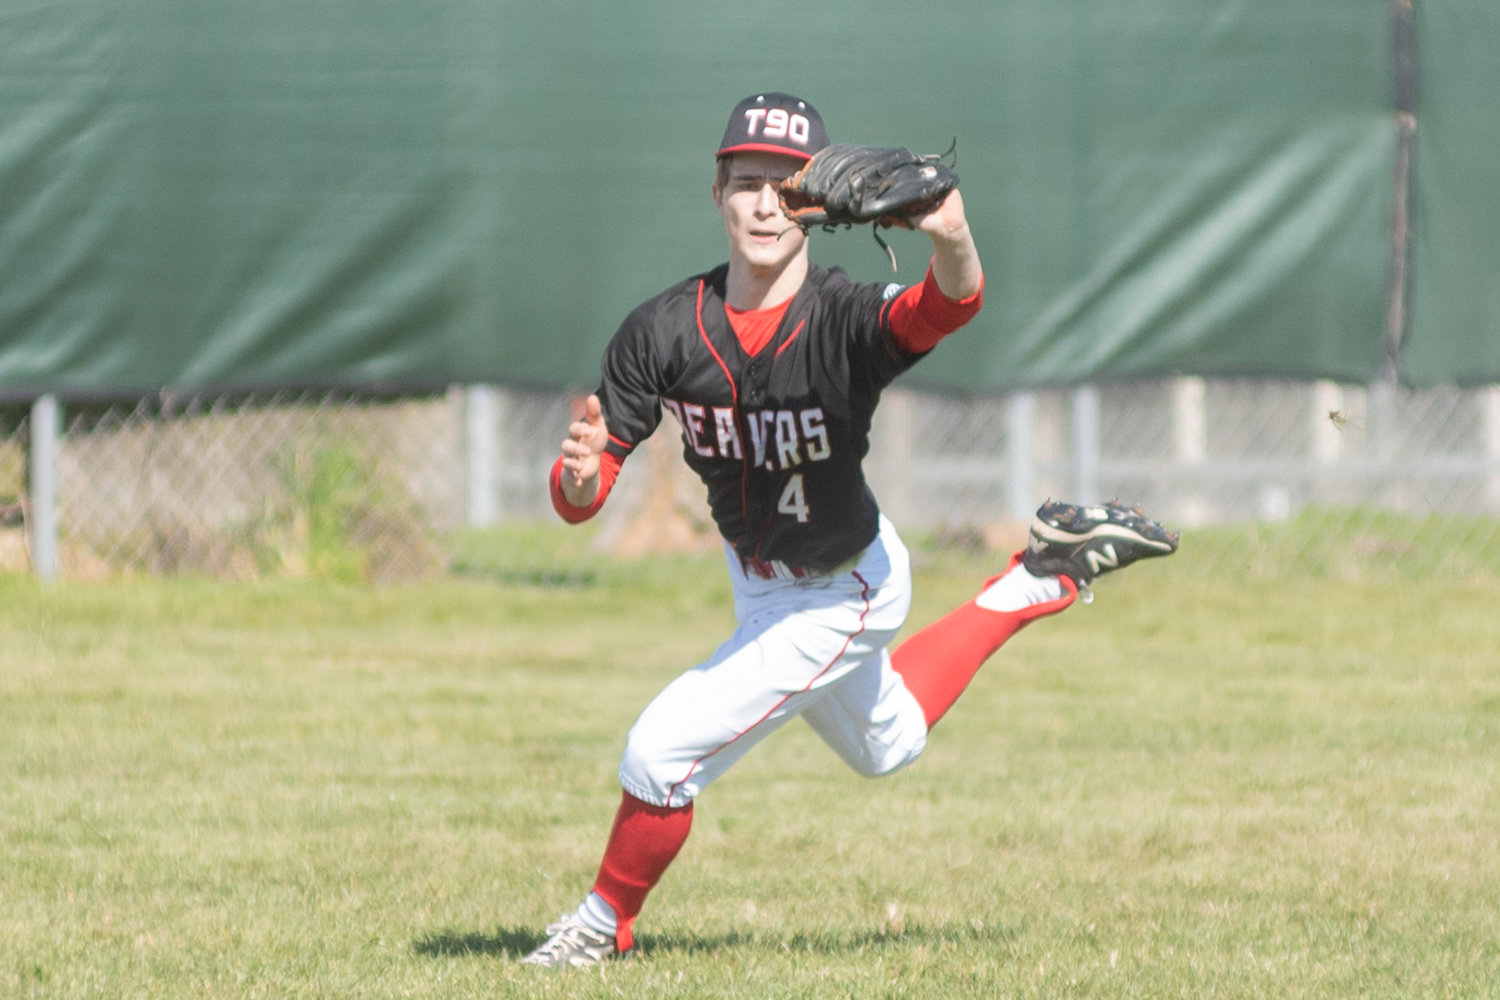 Tenino's Cody Strawn makes a catch in the outfield against Rochester in the Scatter Creek Derby March 12.